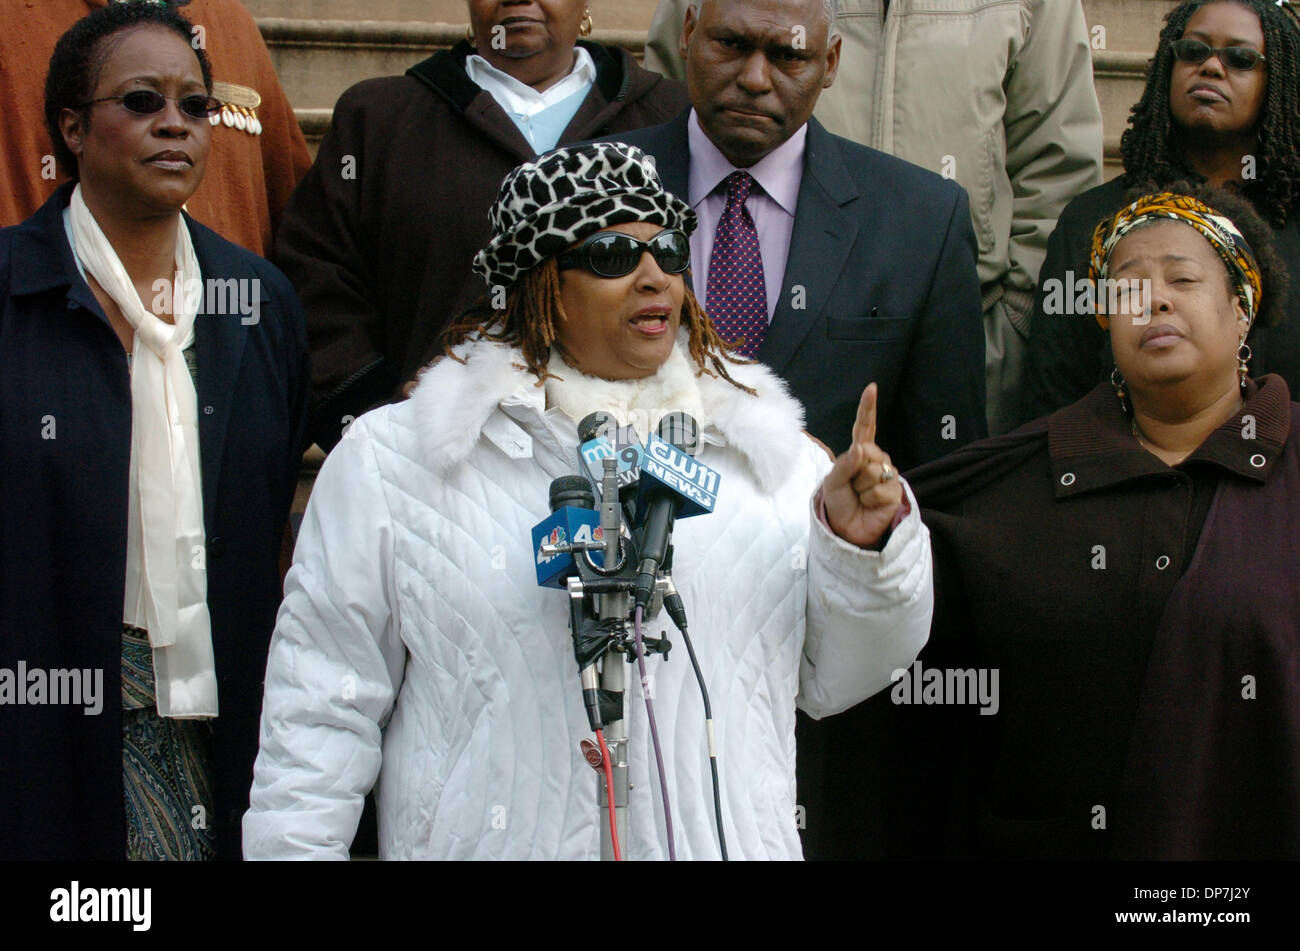 Nov 18, 2006; MANHATTAN, NEW YORK, USA; Jean Corbett Parker (L), of Harlem whose son Latran Parker was 26 when he was shot and killed in 2001 at the corner of 131st Street and 7th Avenue looks on as Jackie Rowe-Adams, (C) of Harlem discusses the separate shooting deaths of her sons Anthony Bouldin, 17 at the time and killed at 122nd and 7th Avenue and Tyrone Bouldin, 28 at the time Stock Photo